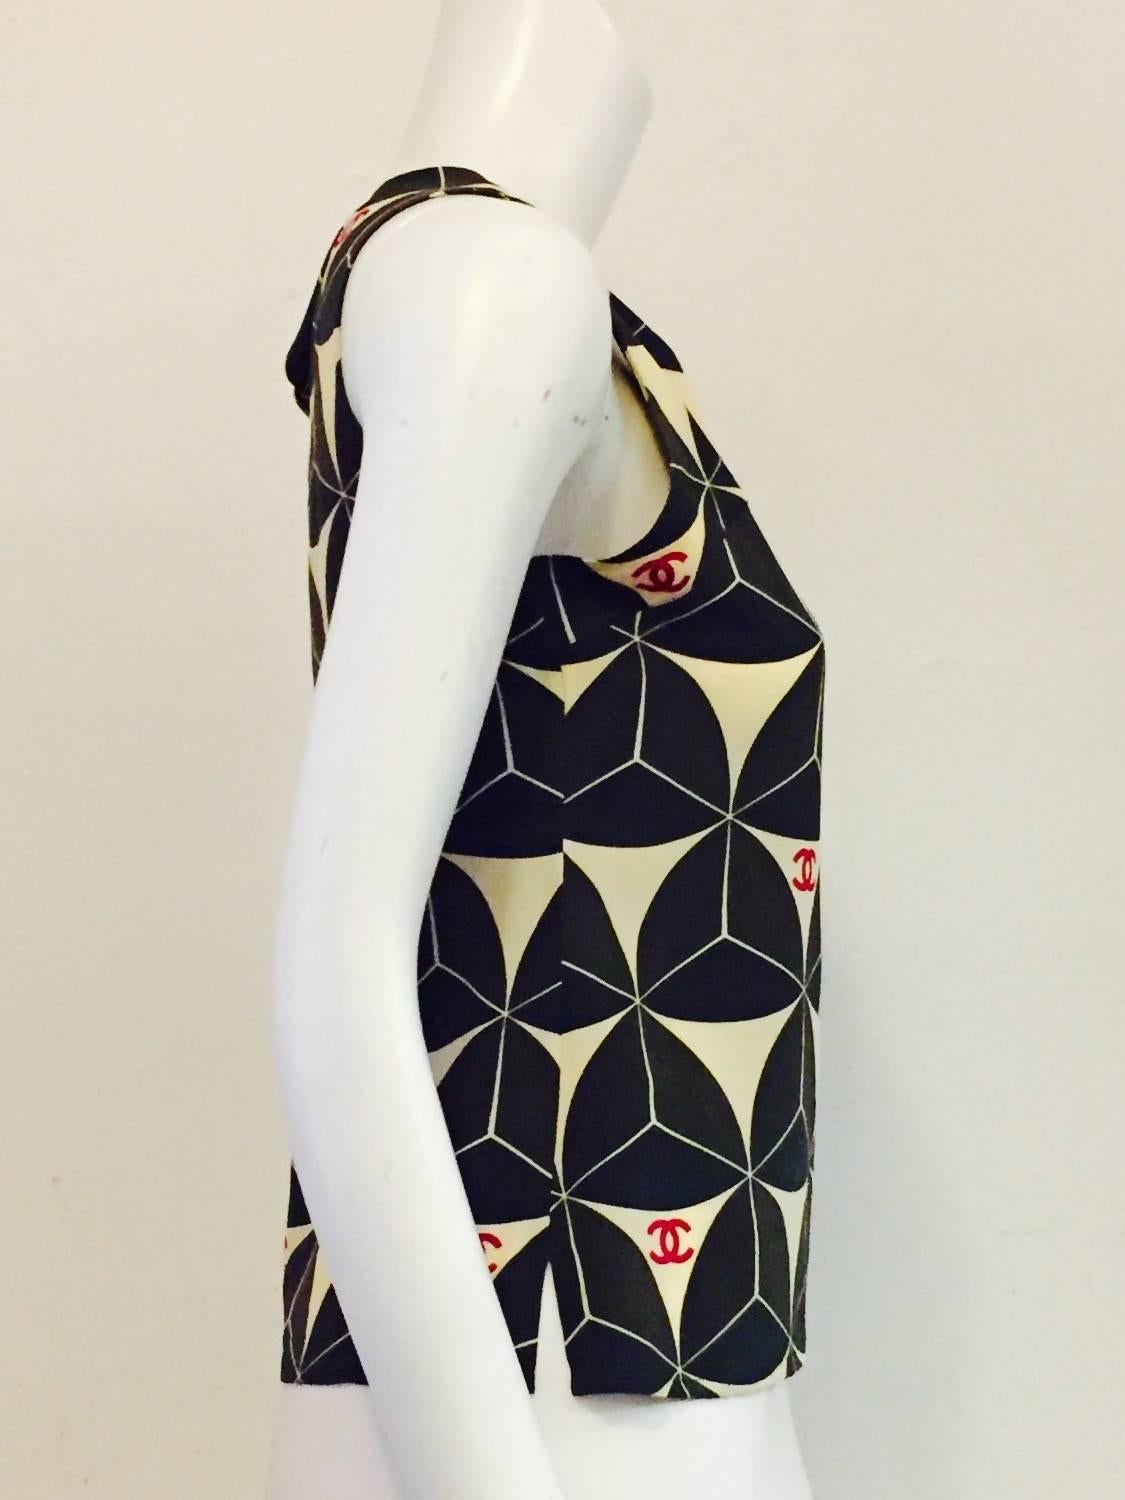 Chanel silk top with CC logo in Red on Black and Beige geometric design.  Always in style! Sleeveless camisole style top alone with skirt or slacks, under jacket or with black jeans and sweater!.